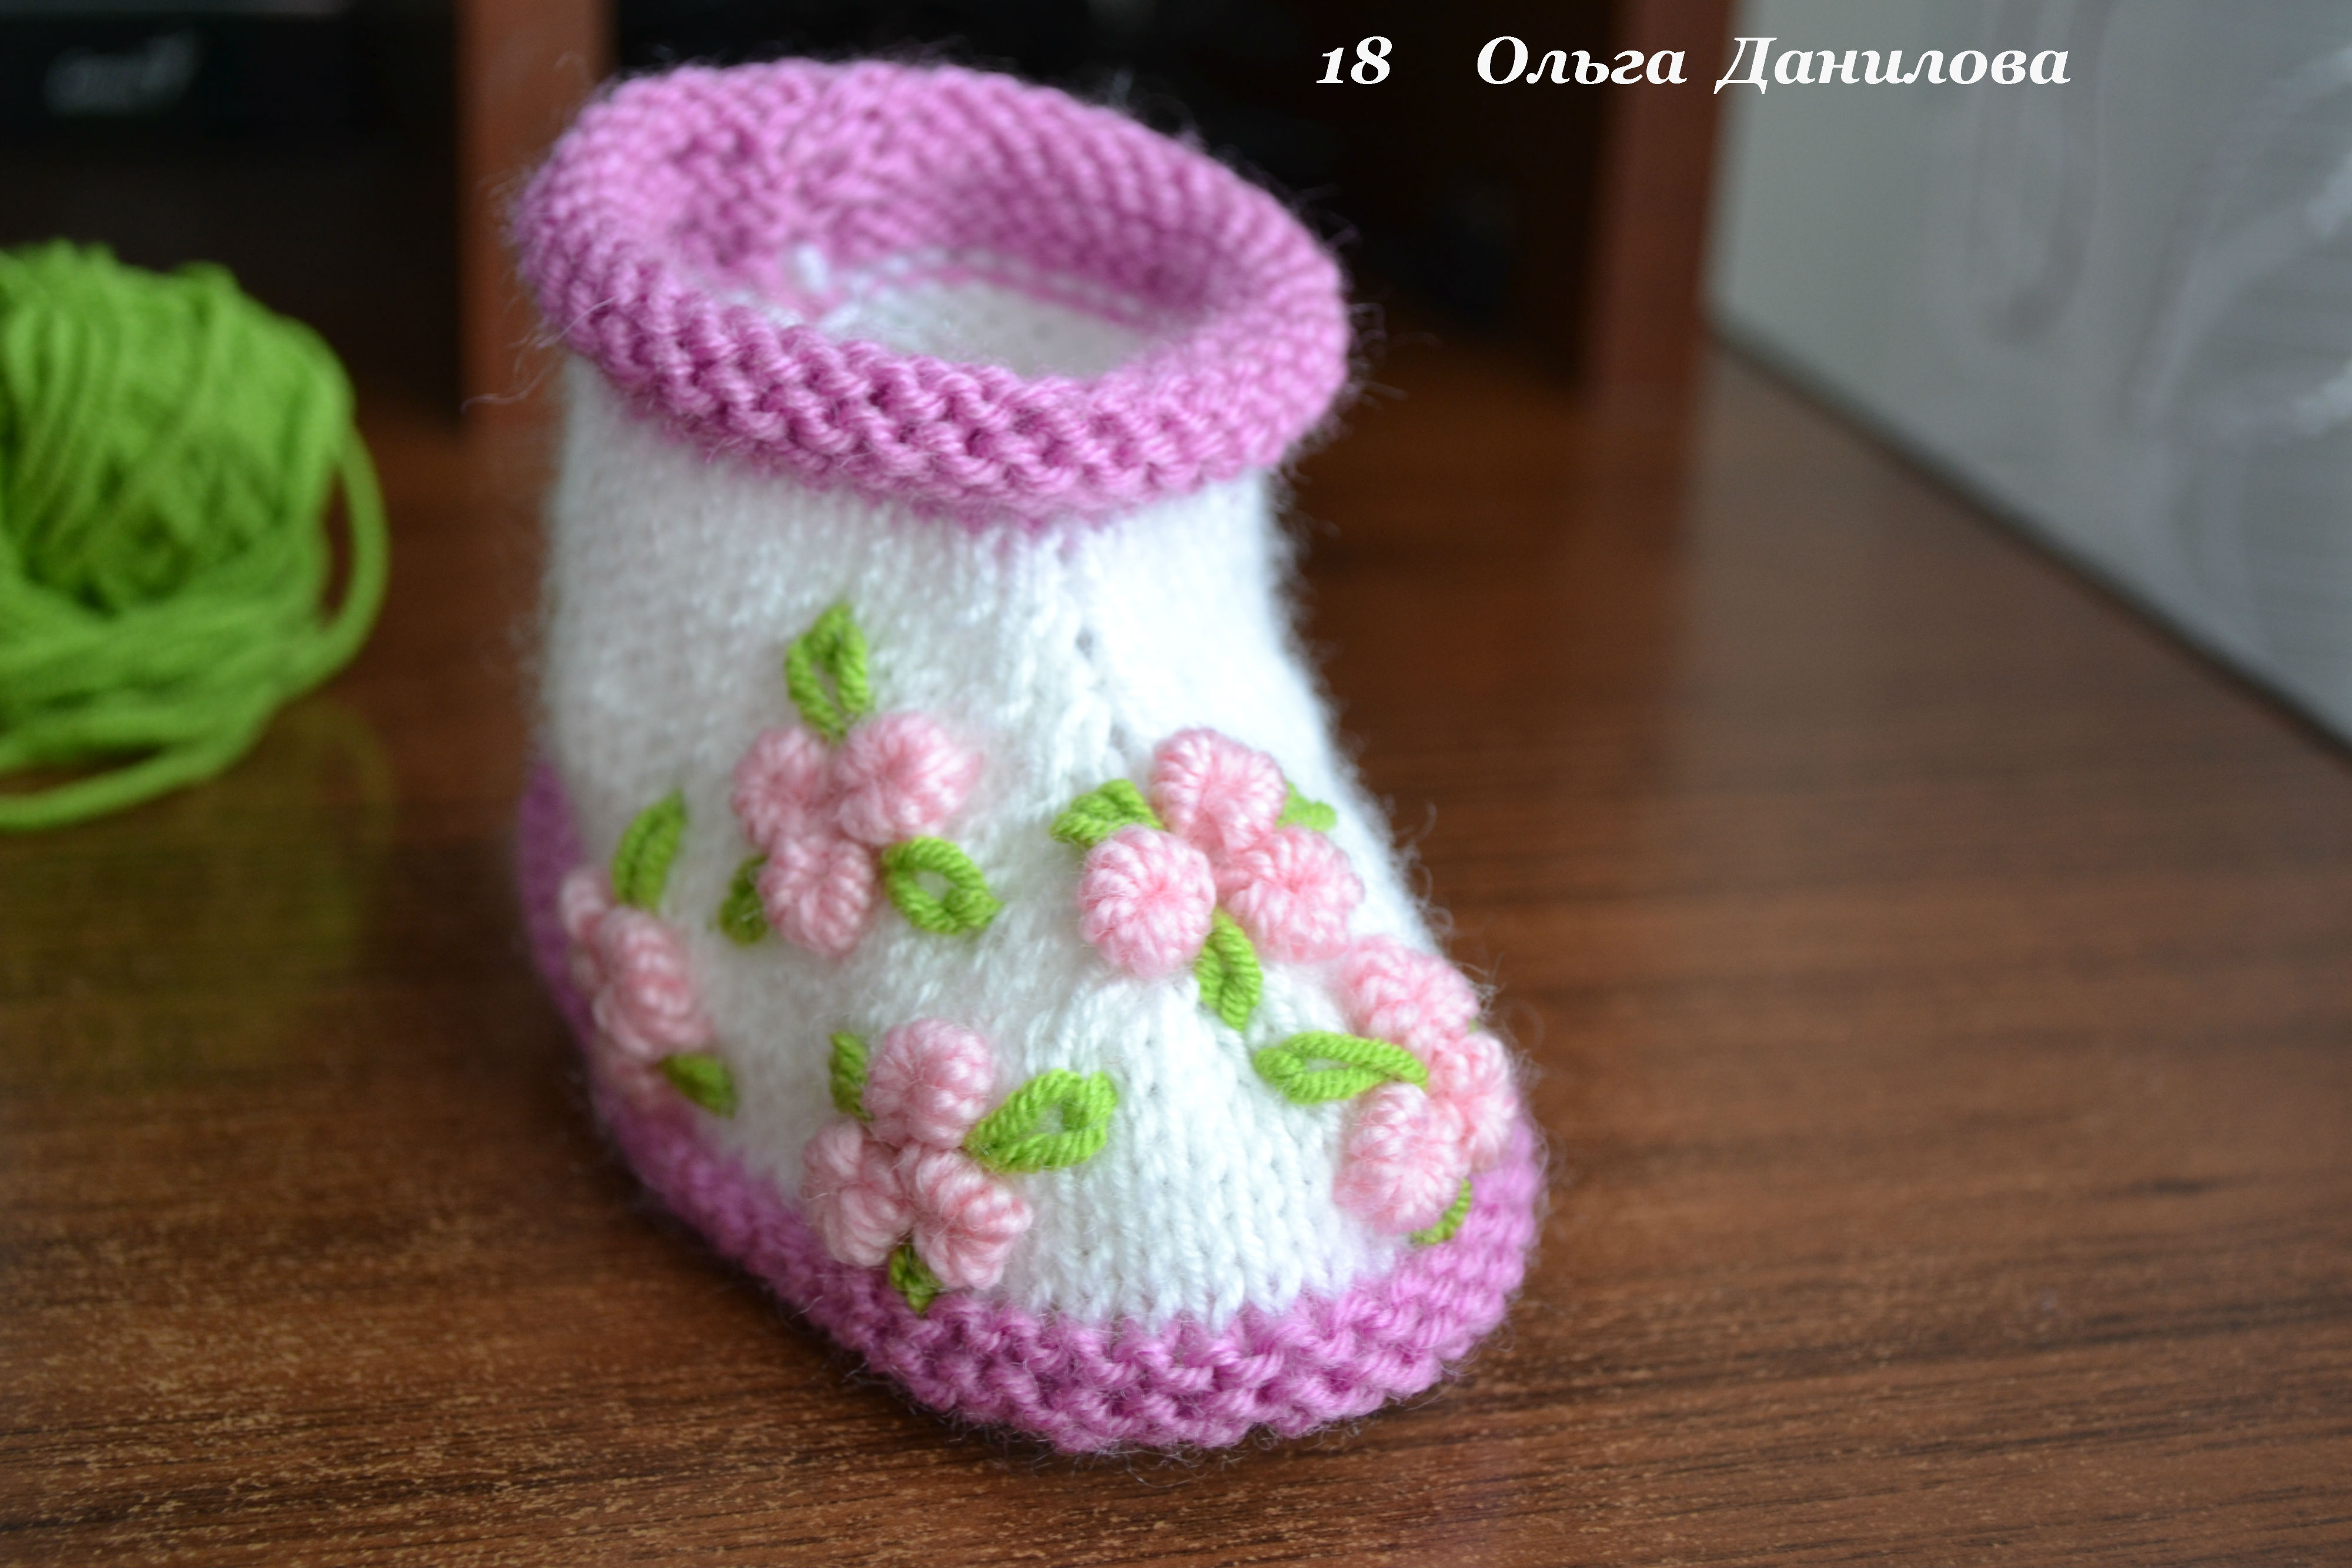 How-to-Make-Pretty-Knitted-Baby-Booties-20.jpg